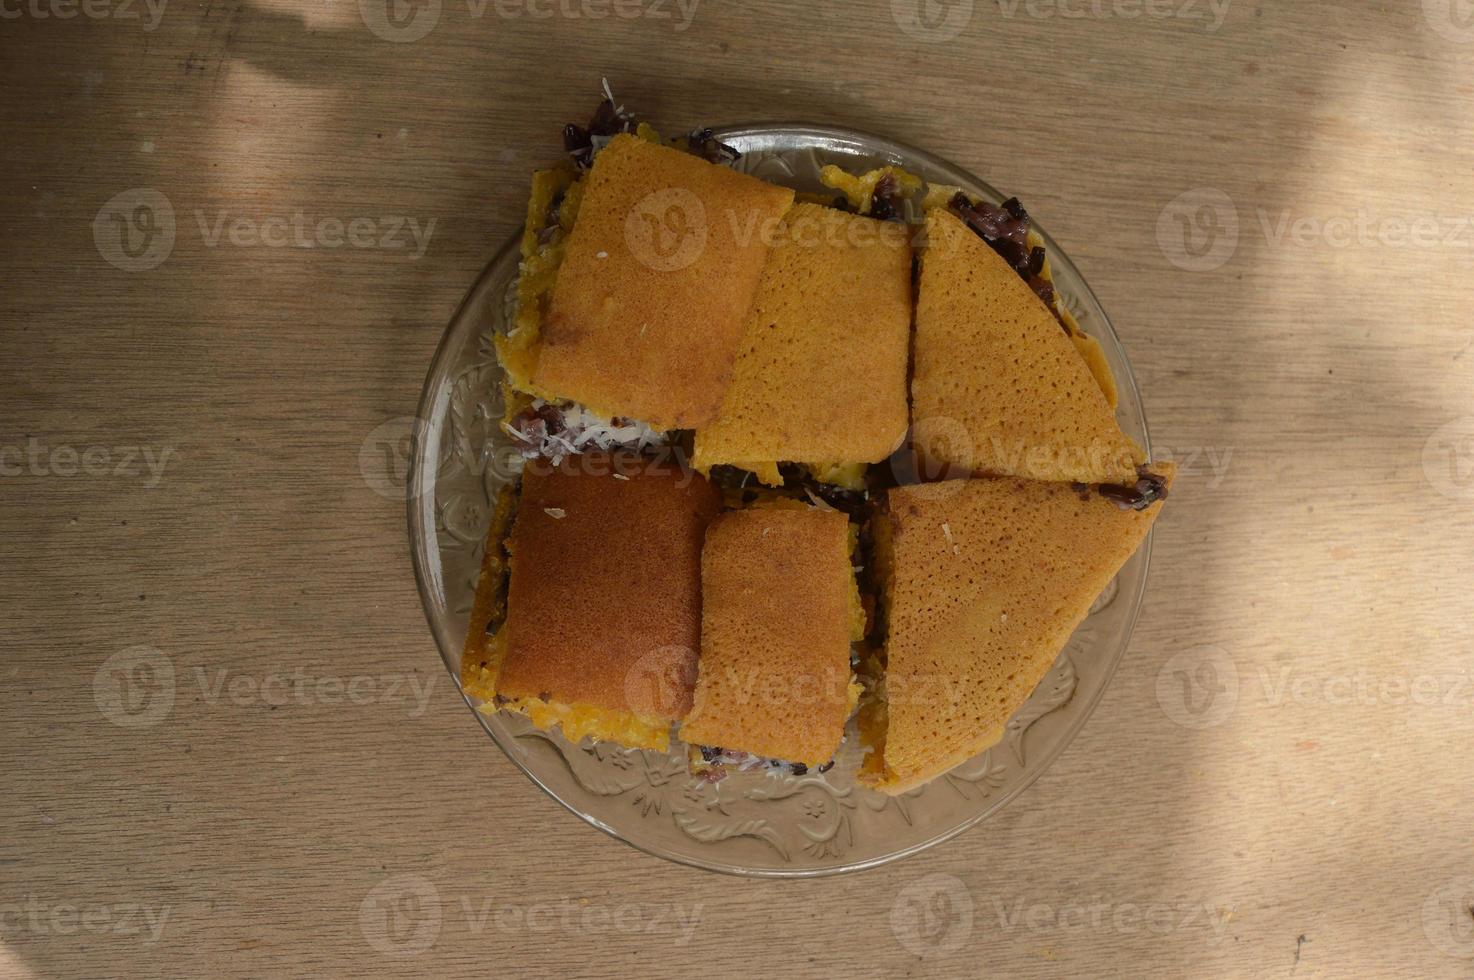 Terang Bulan food made from flour and stuffed with black sticky rice originating from Indonesia. with plates and wooden background. photo